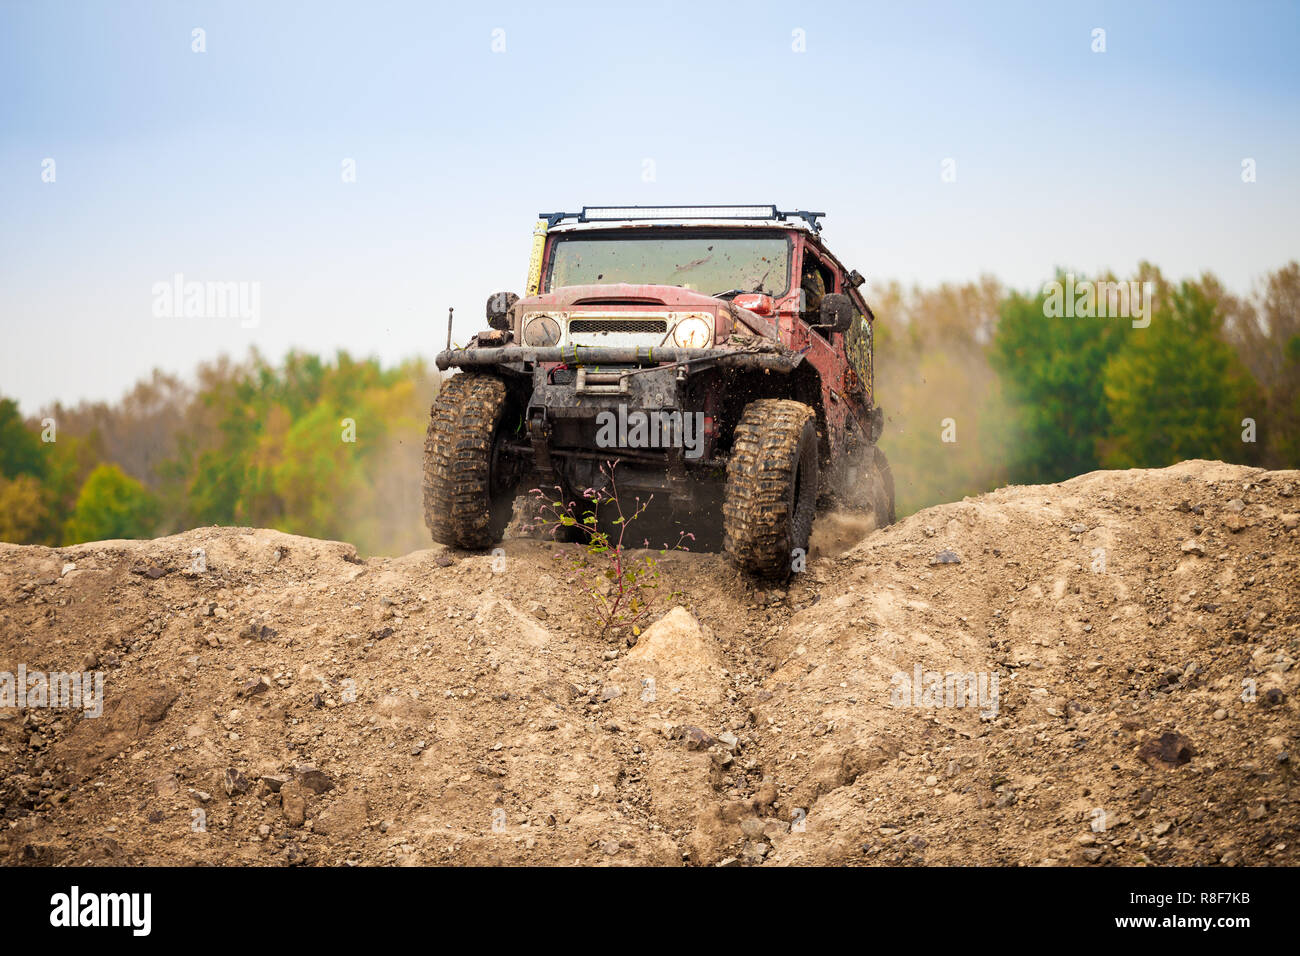 Classic red off road car moving on dirt terrain Stock Photo